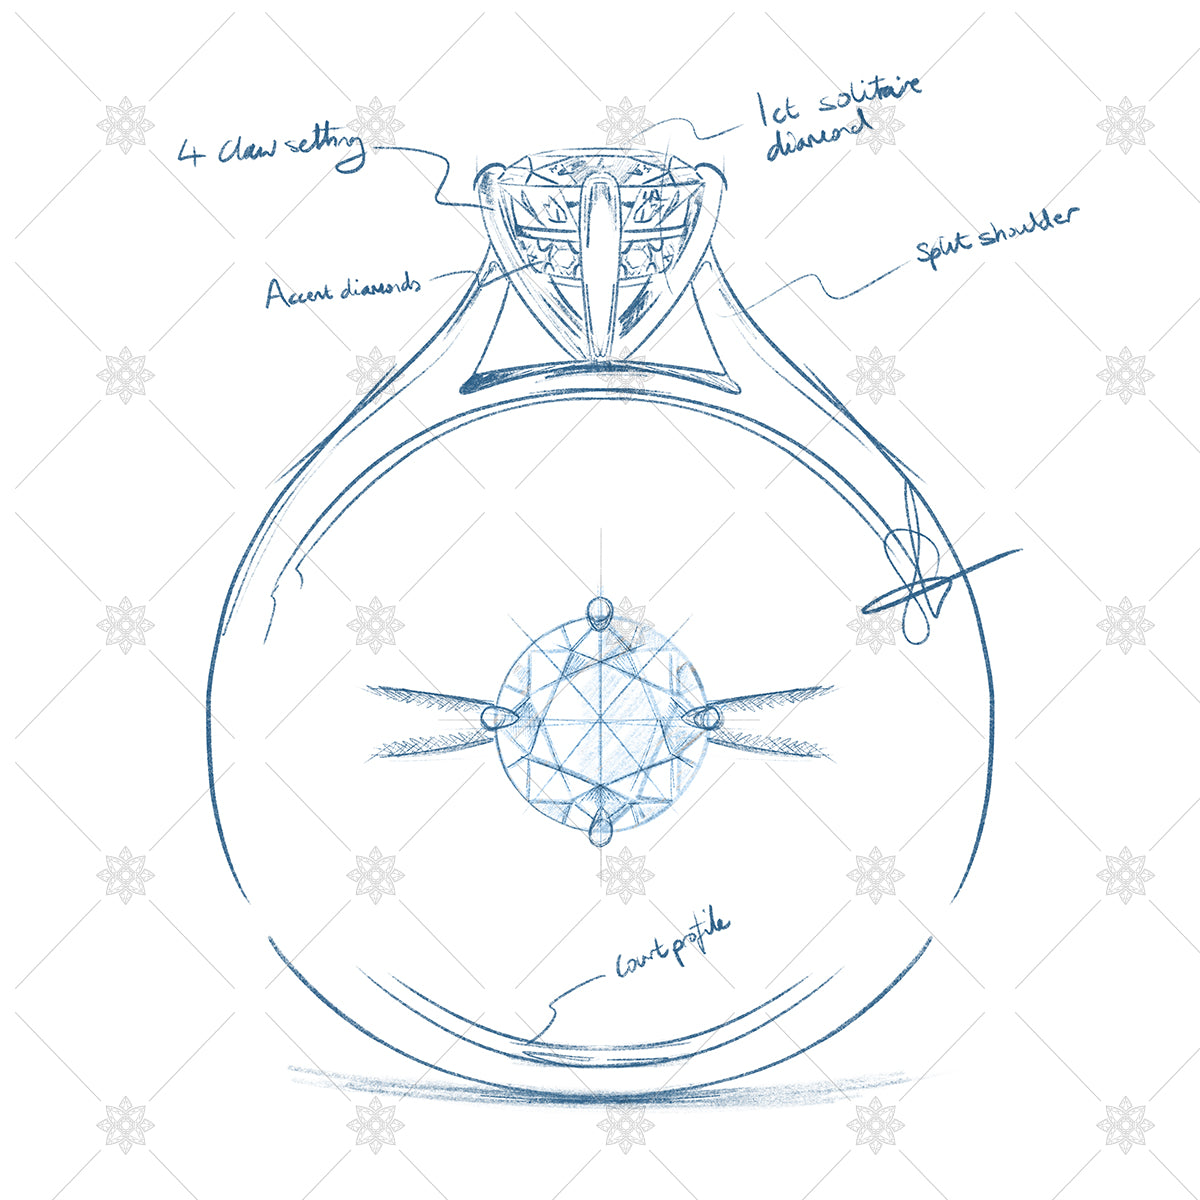 Designing a bespoke ring - how does this color combo & sketch concept look?  : r/jewelrymaking